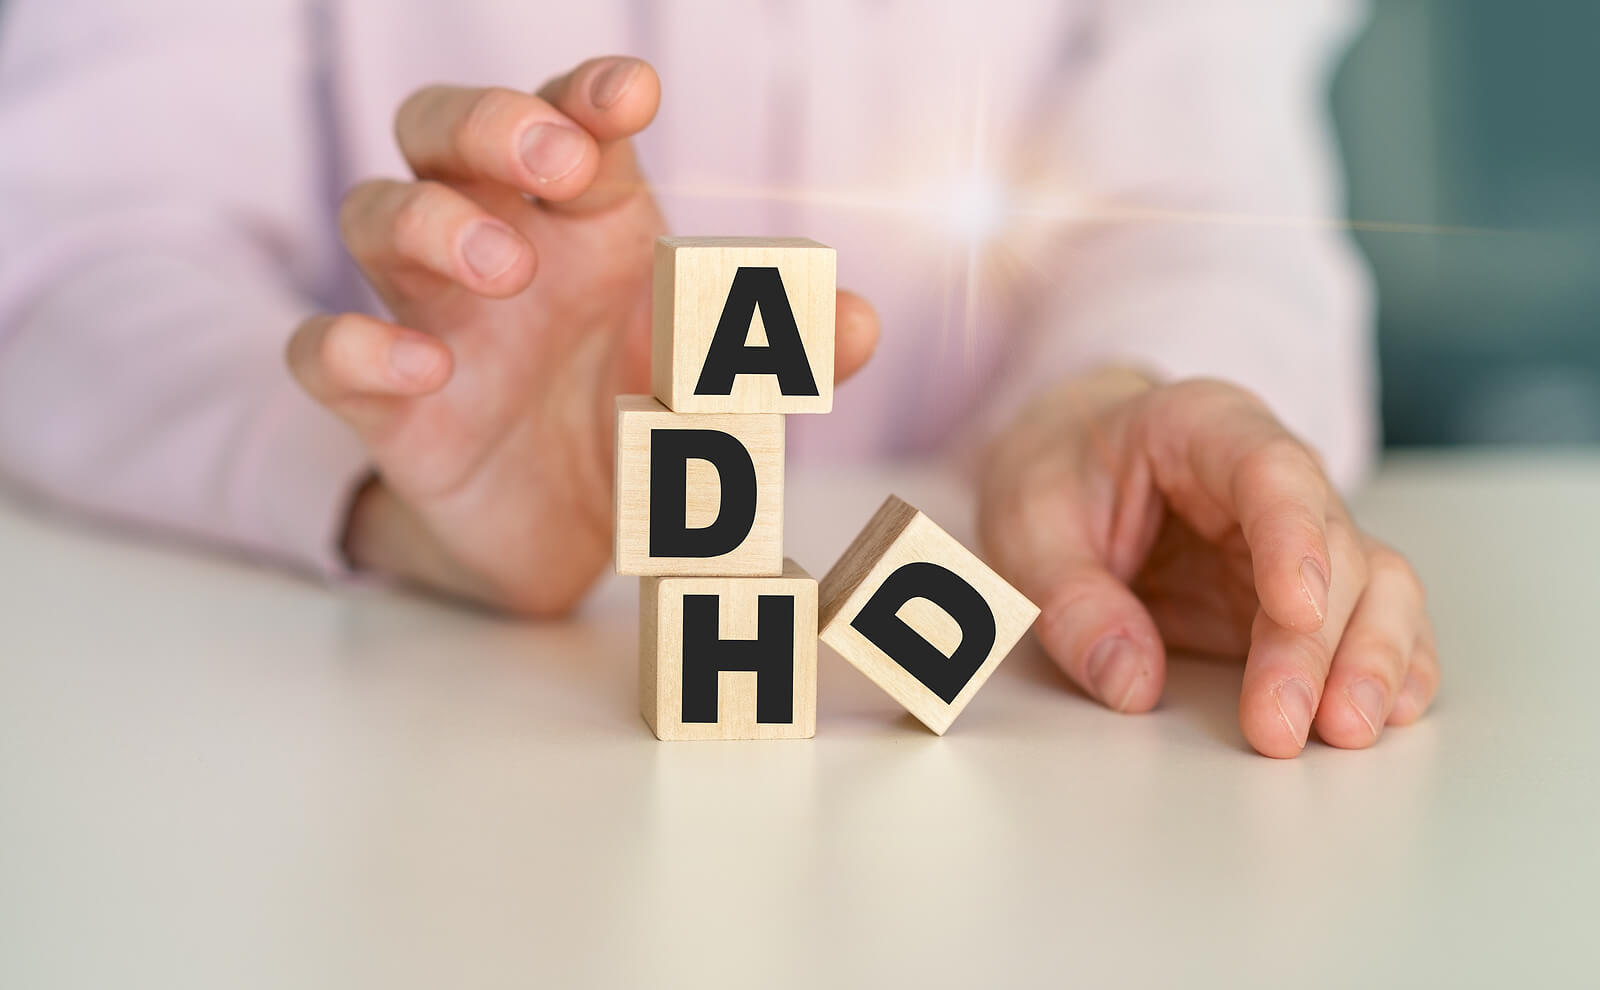 ADHD is spelled on wooden blocks. Wondering about ADHD testing in San Francisco, CA area? Learn more here from our ADHD affirming psychologists here!